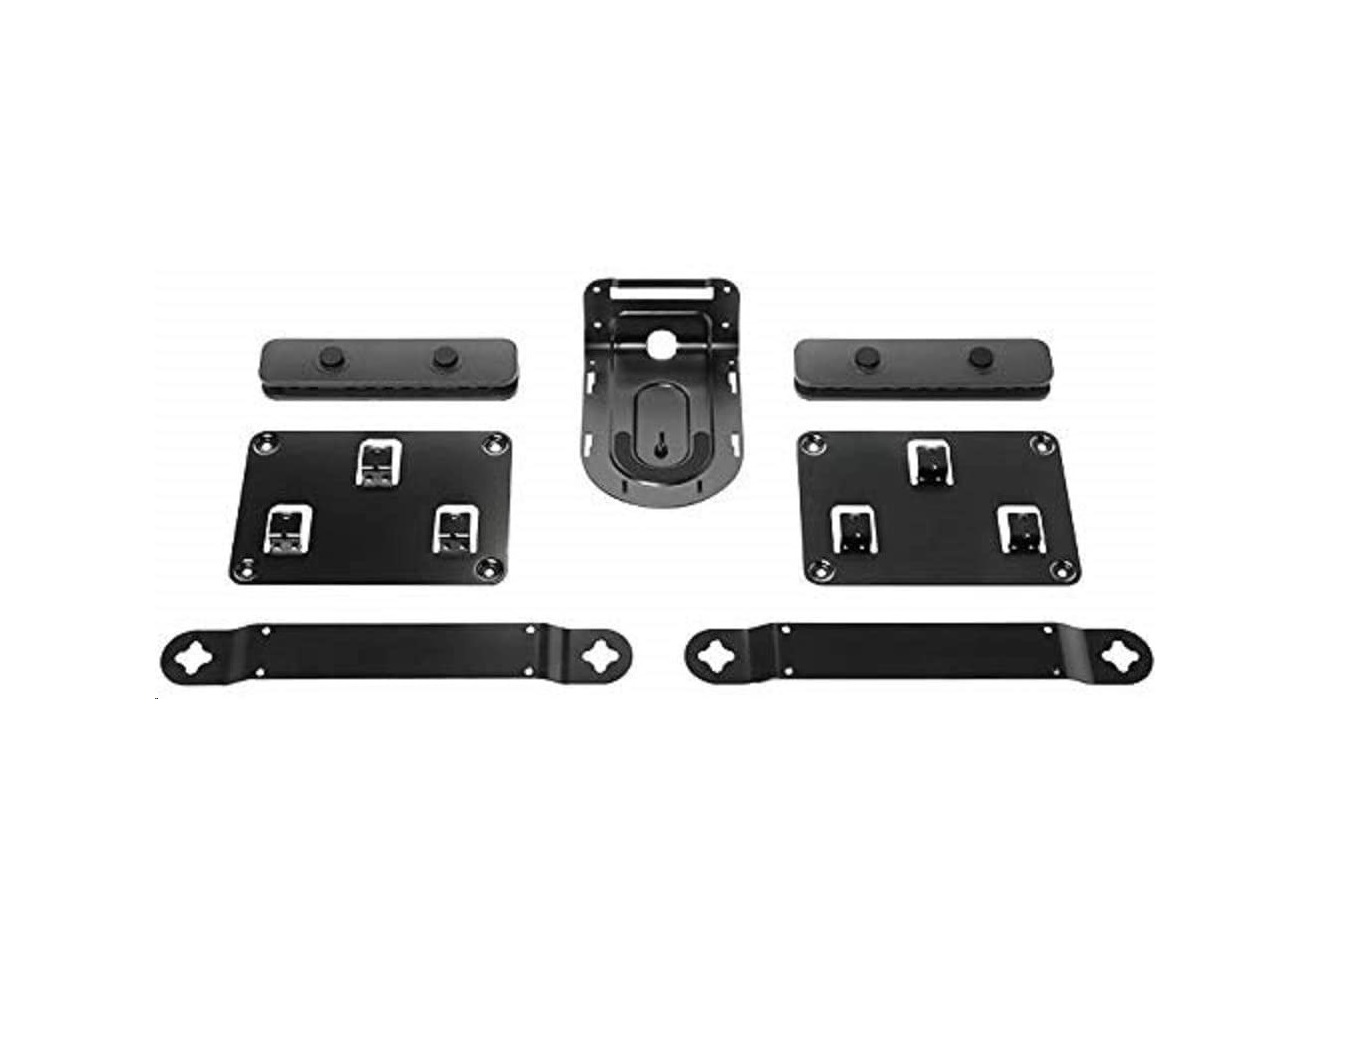 Logitech Rally Video Conferencing Mounting Kit 939-001644